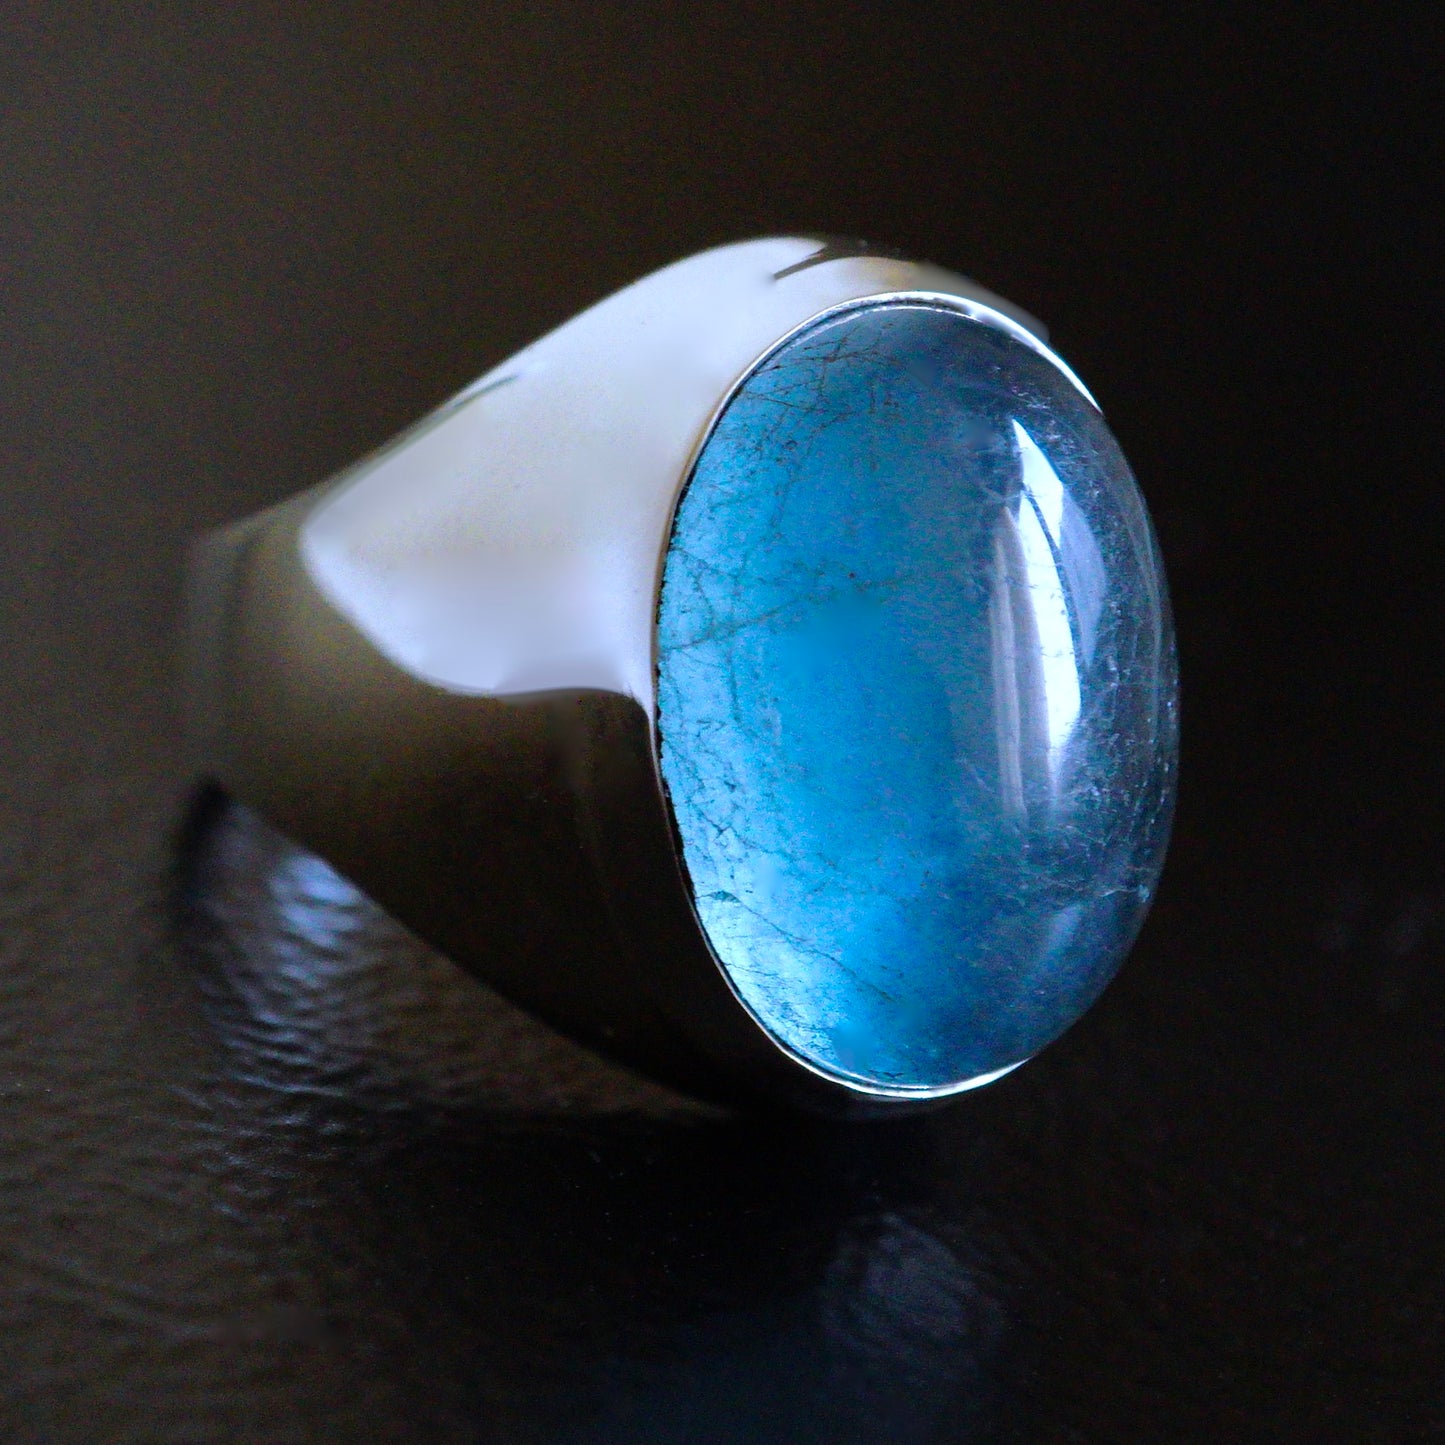 Silver Mens Ring blue Aquamarine natural gemstone solid 925 Sterling Handmade Unique Artisan Jewelry